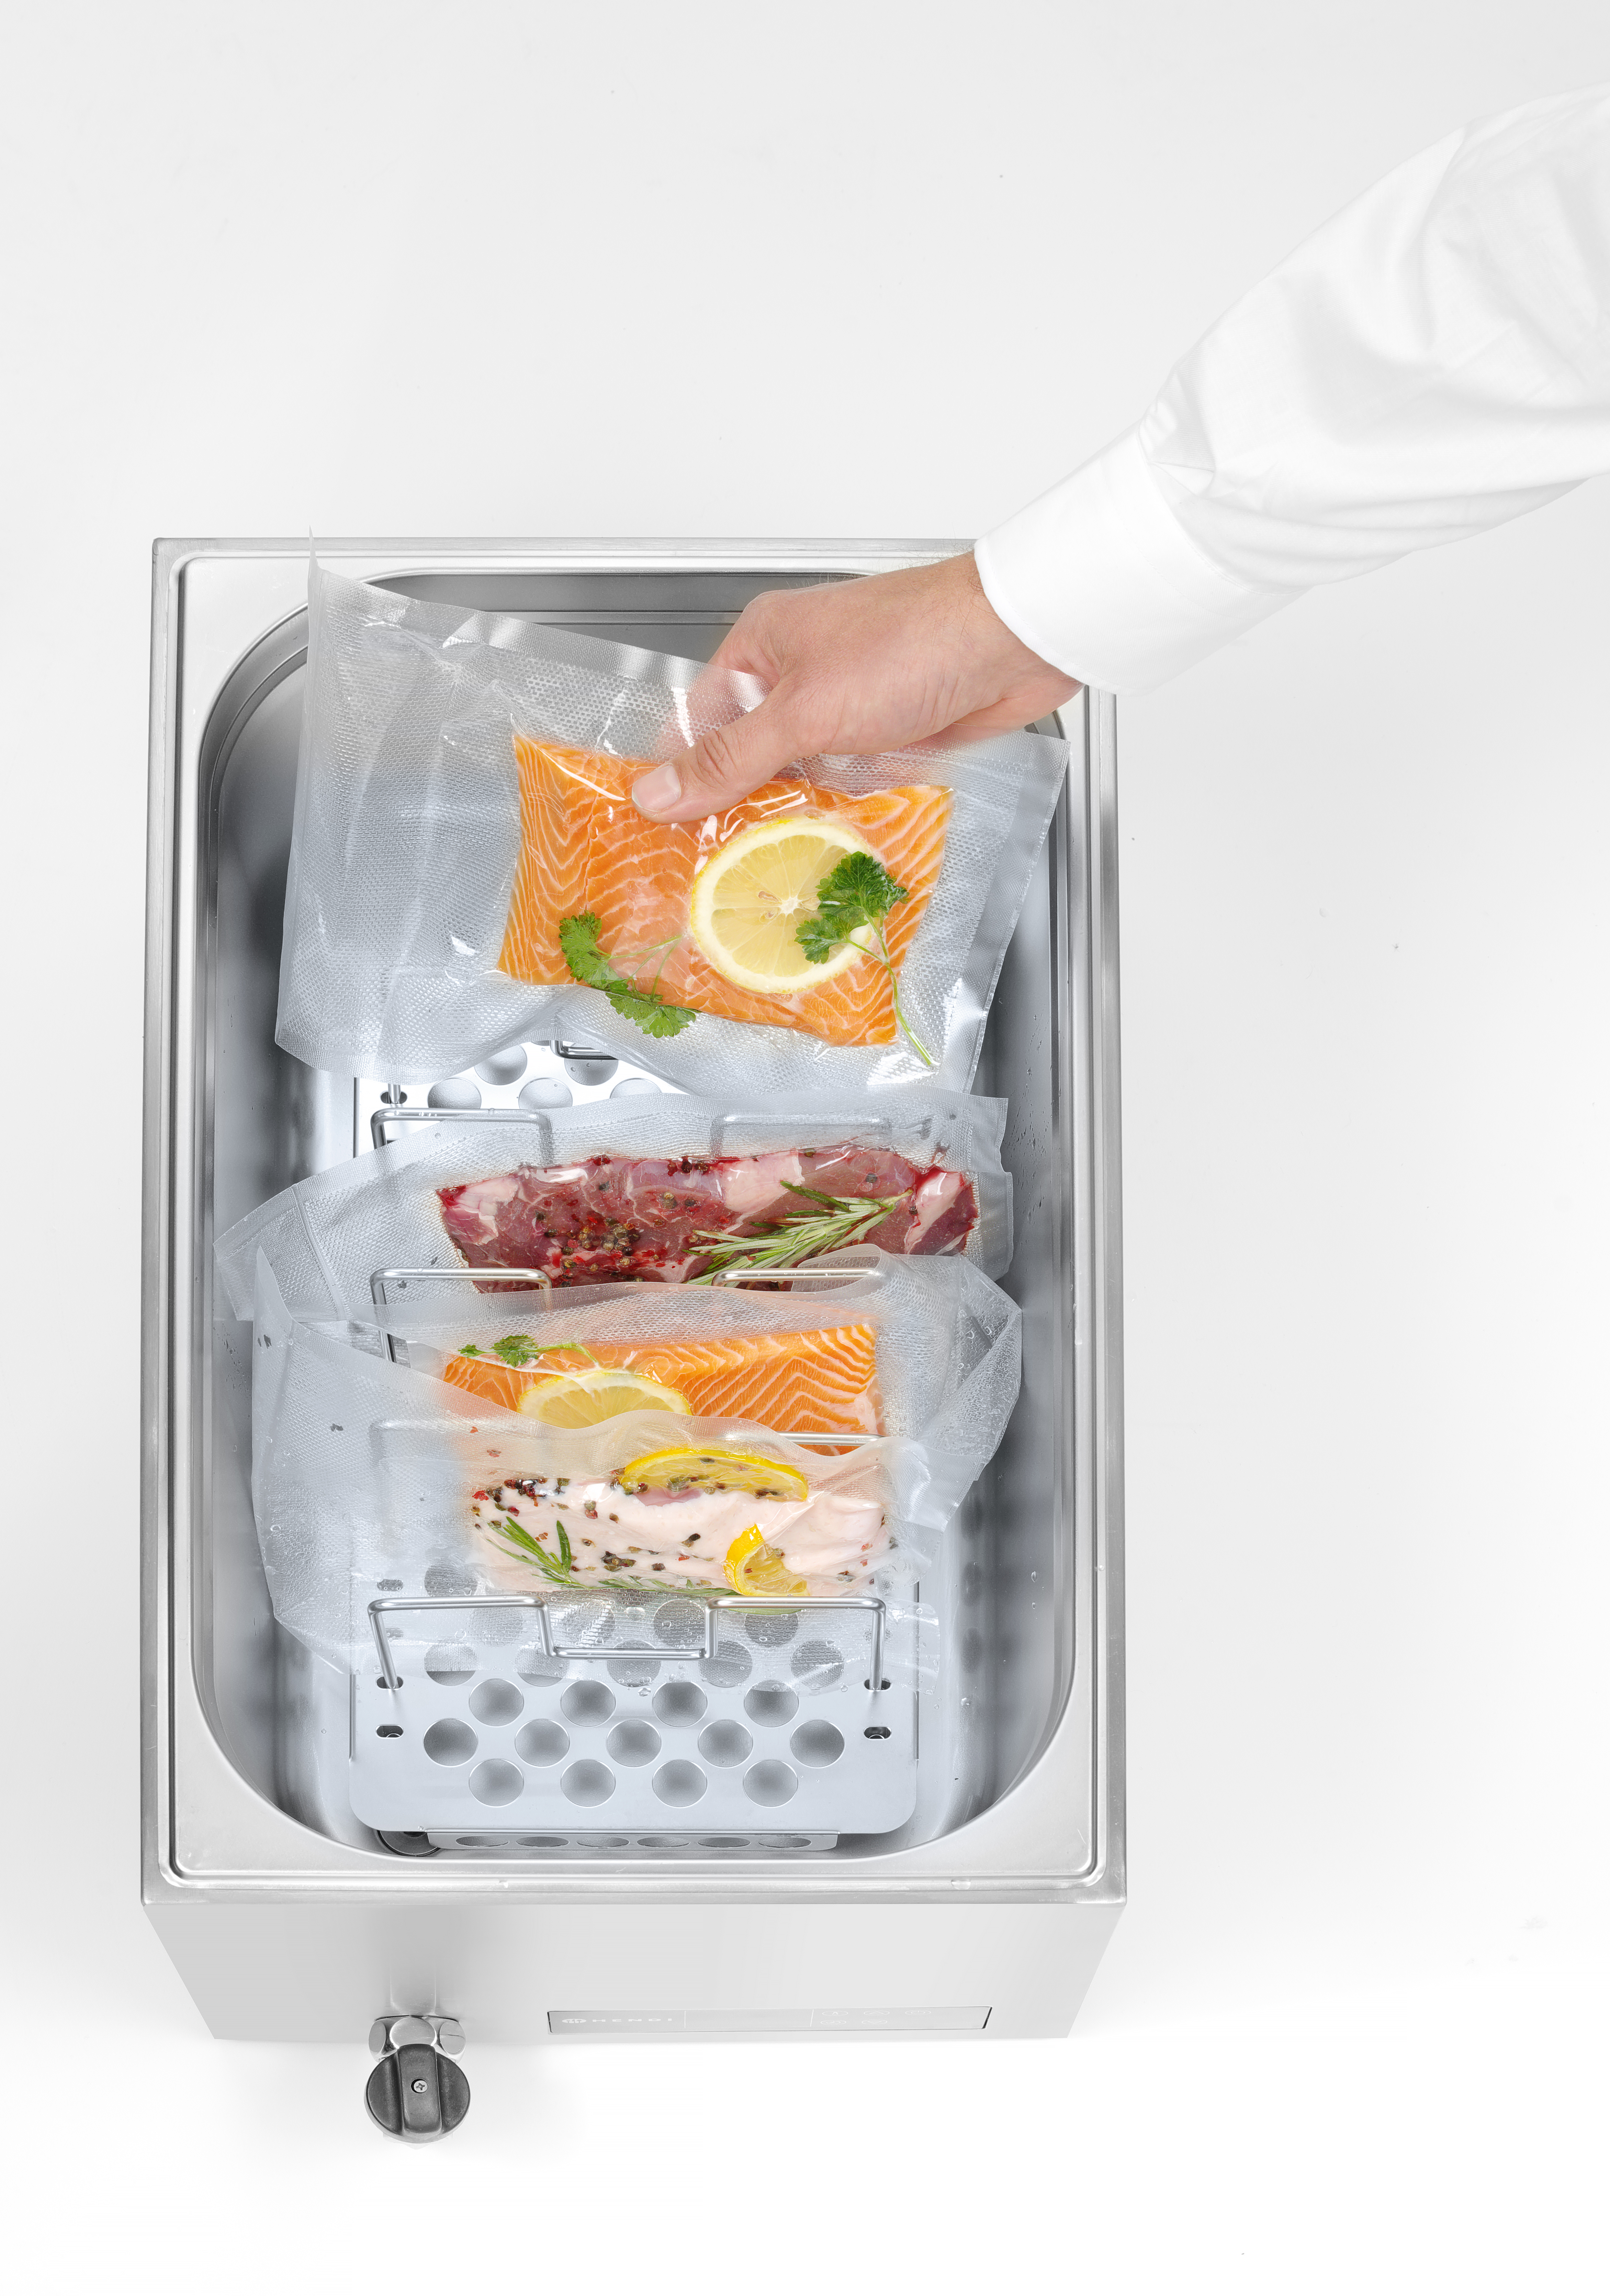 Sous vide system 1/1 - Tools for Chefs